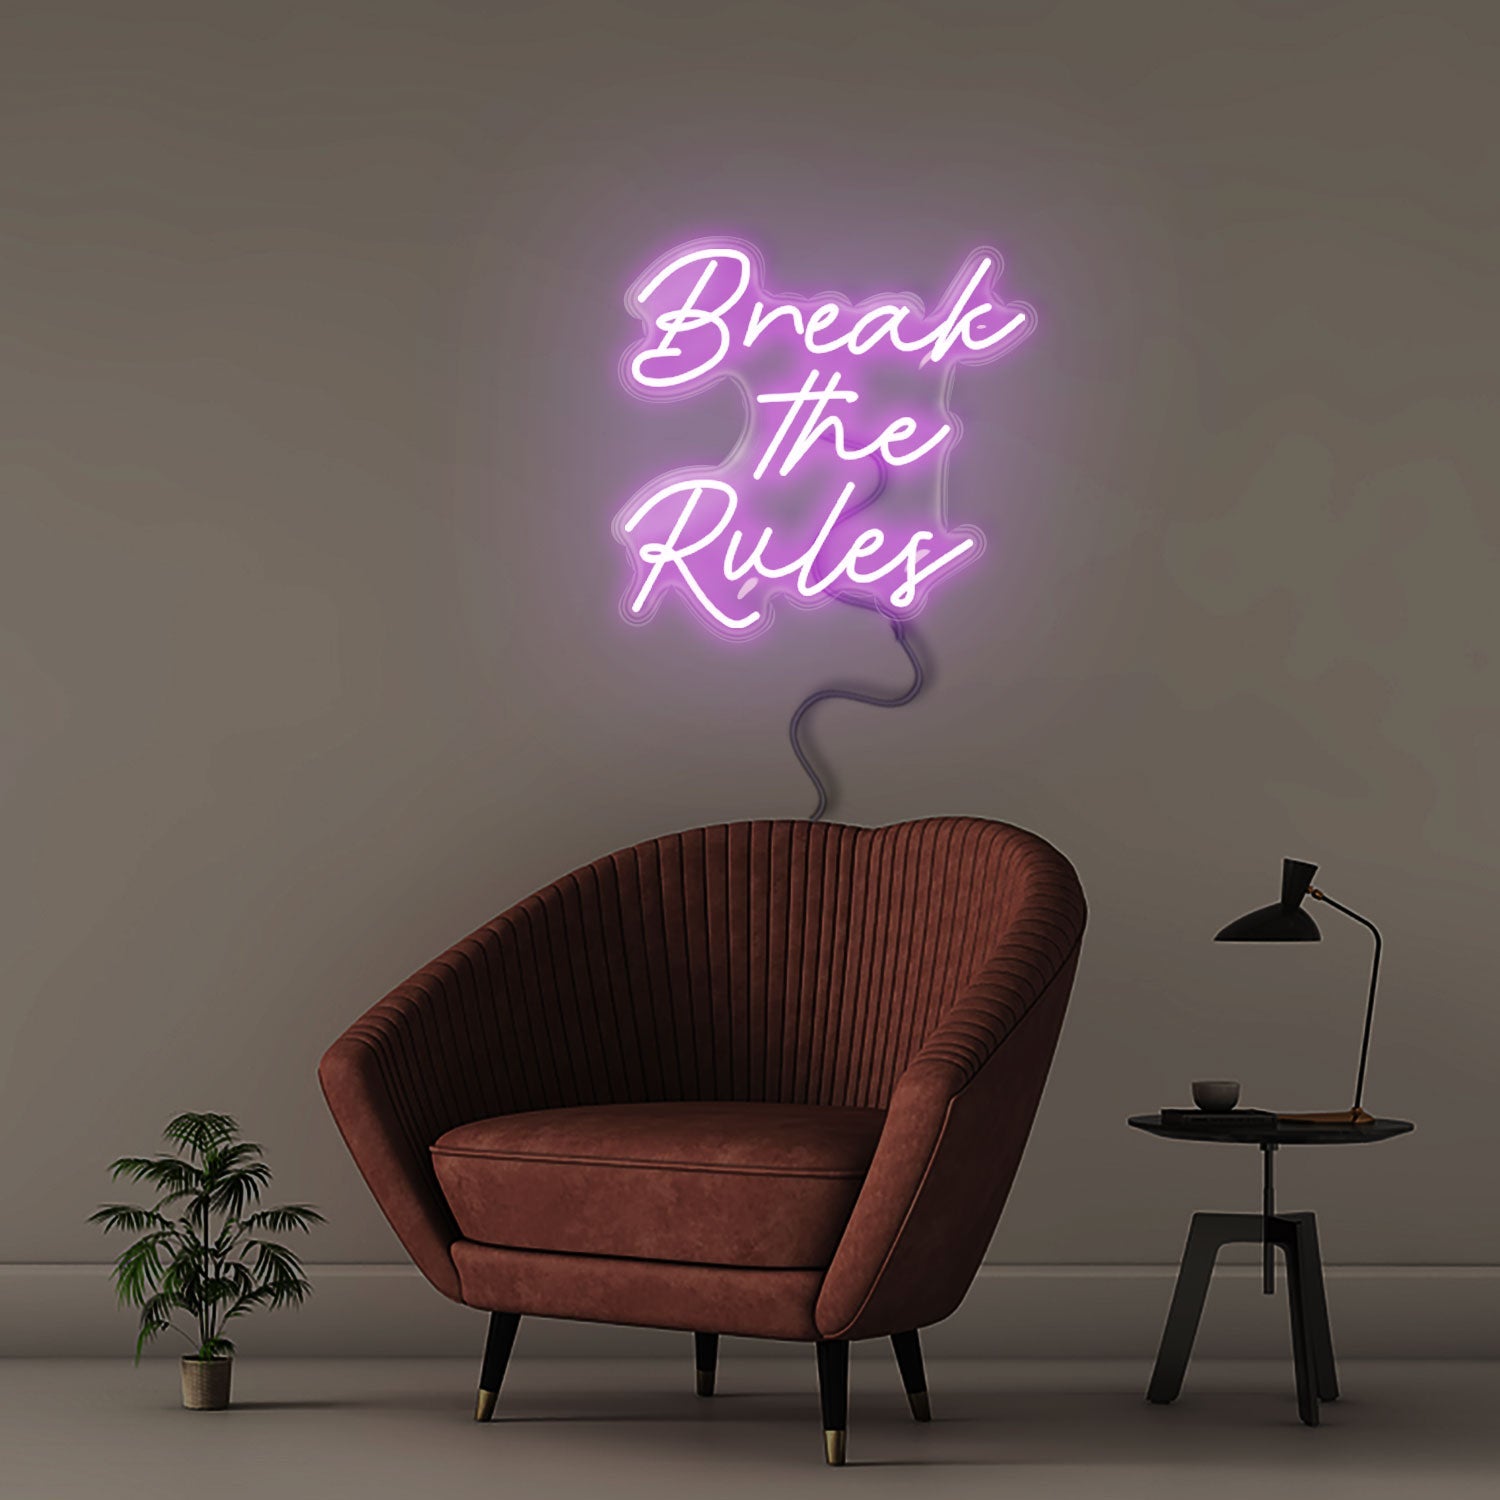 Break The Rules - Neonific - LED Neon Signs - 60cm - White